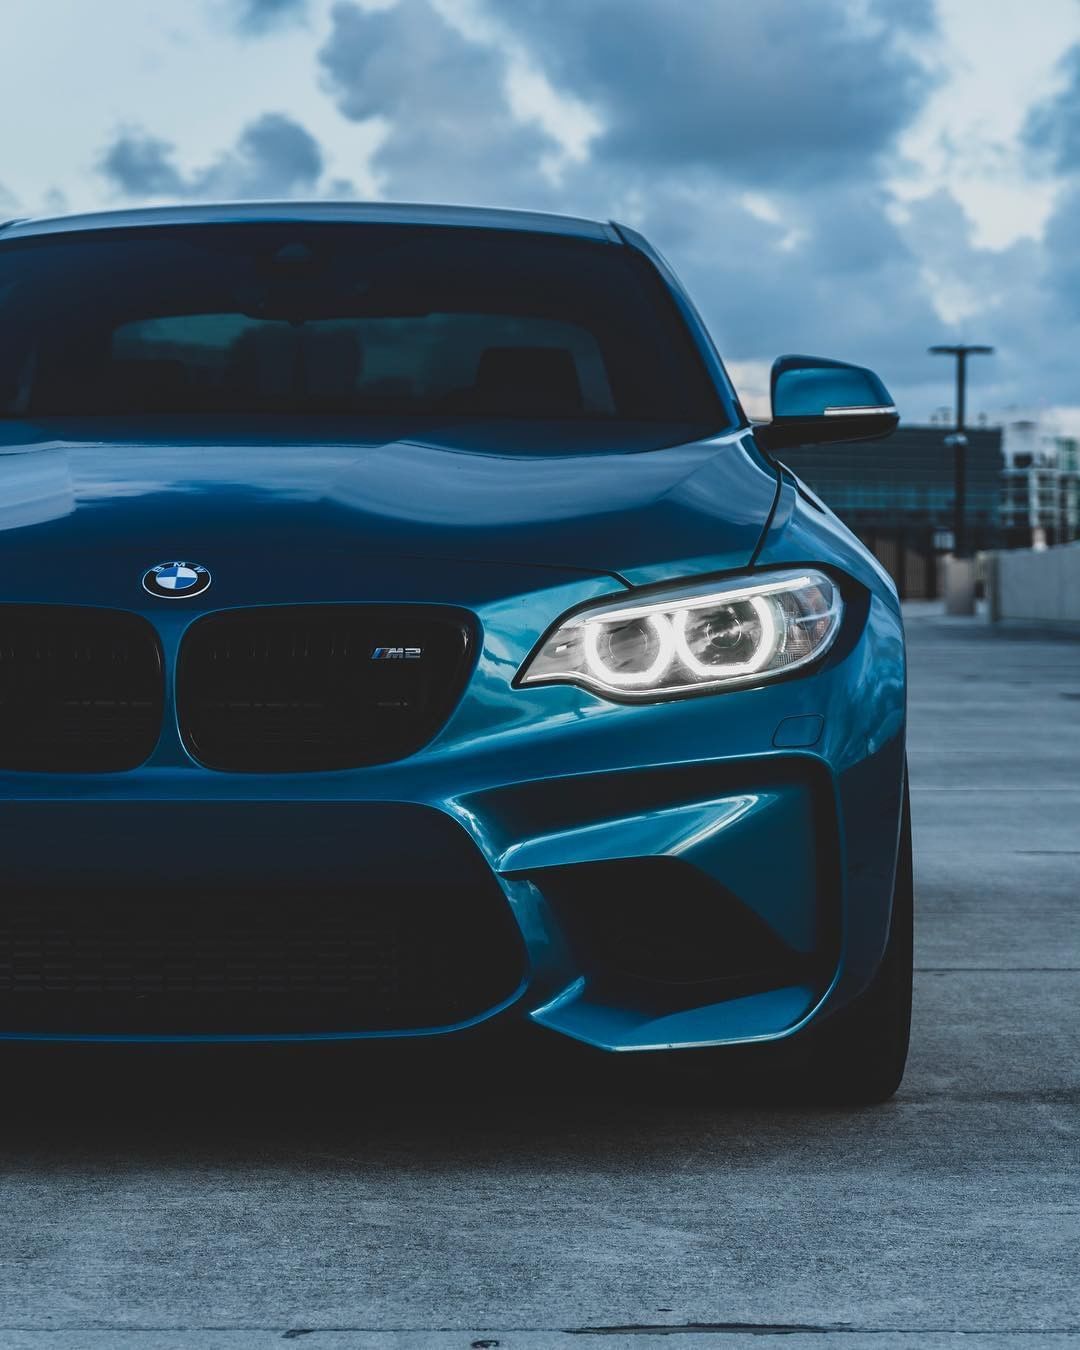 Bmw M2 Coupe Wallpapers